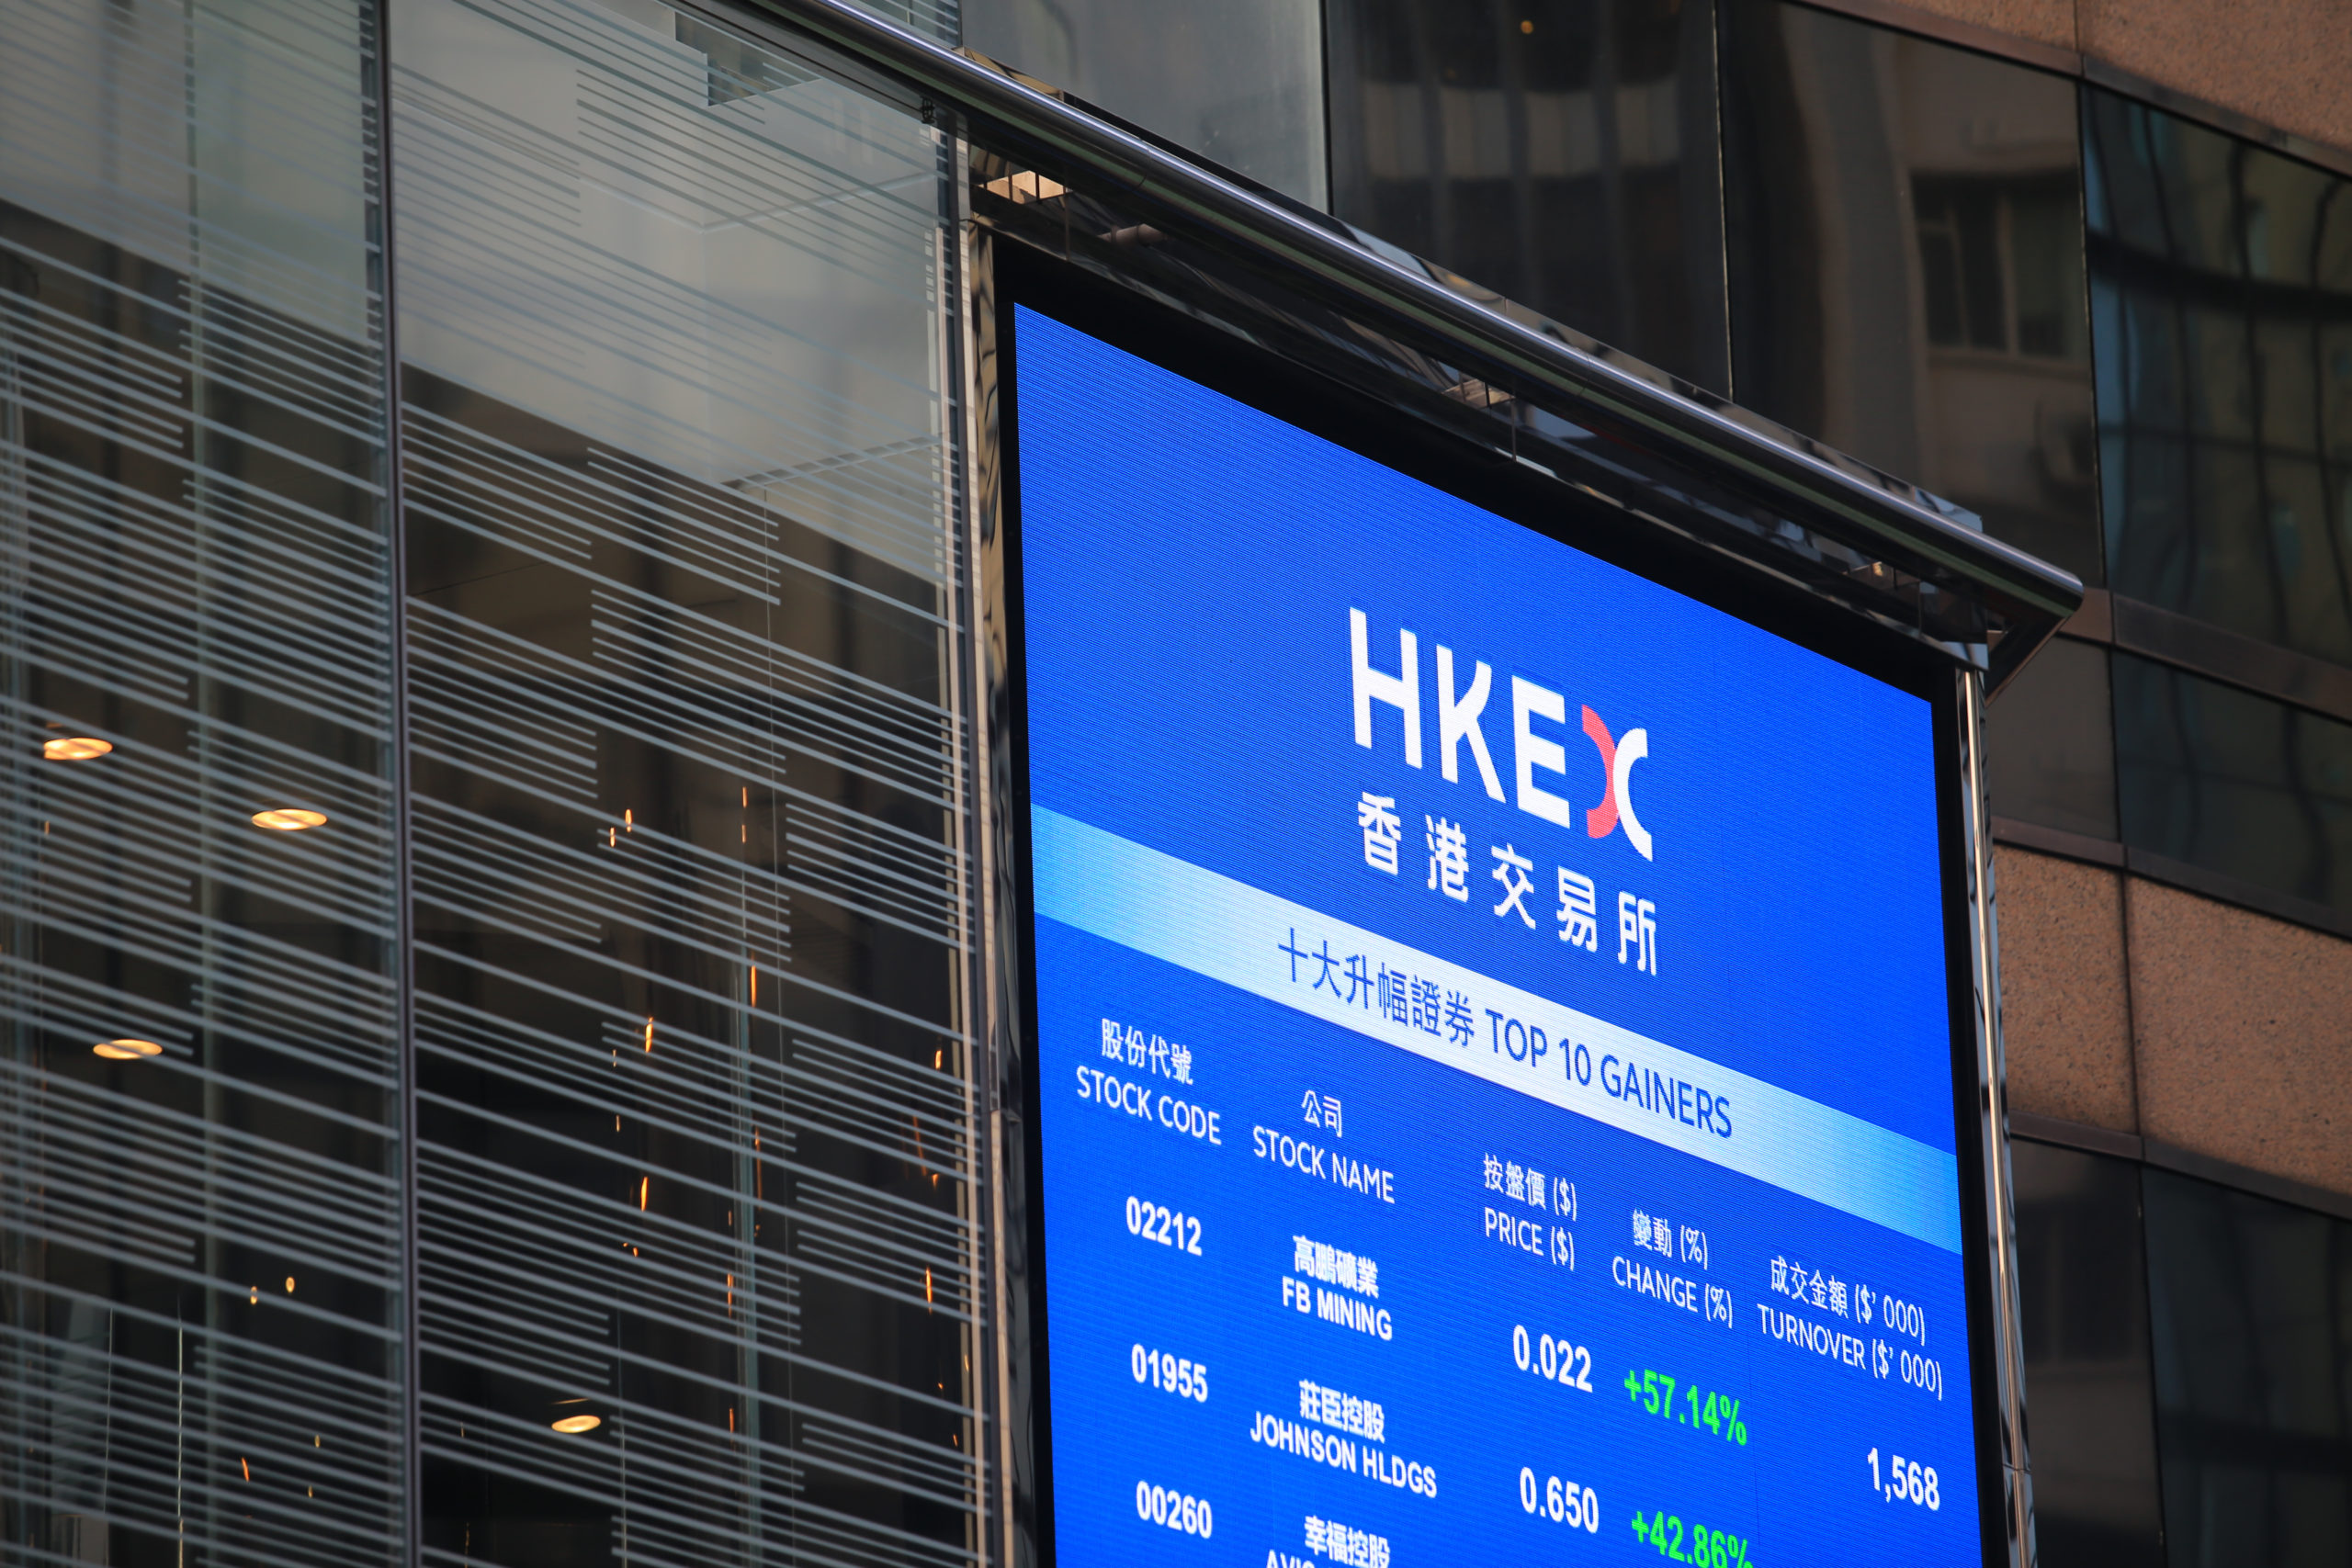 Amid SPAC frenzy, the Hong Kong Stock Exchange is looking at options